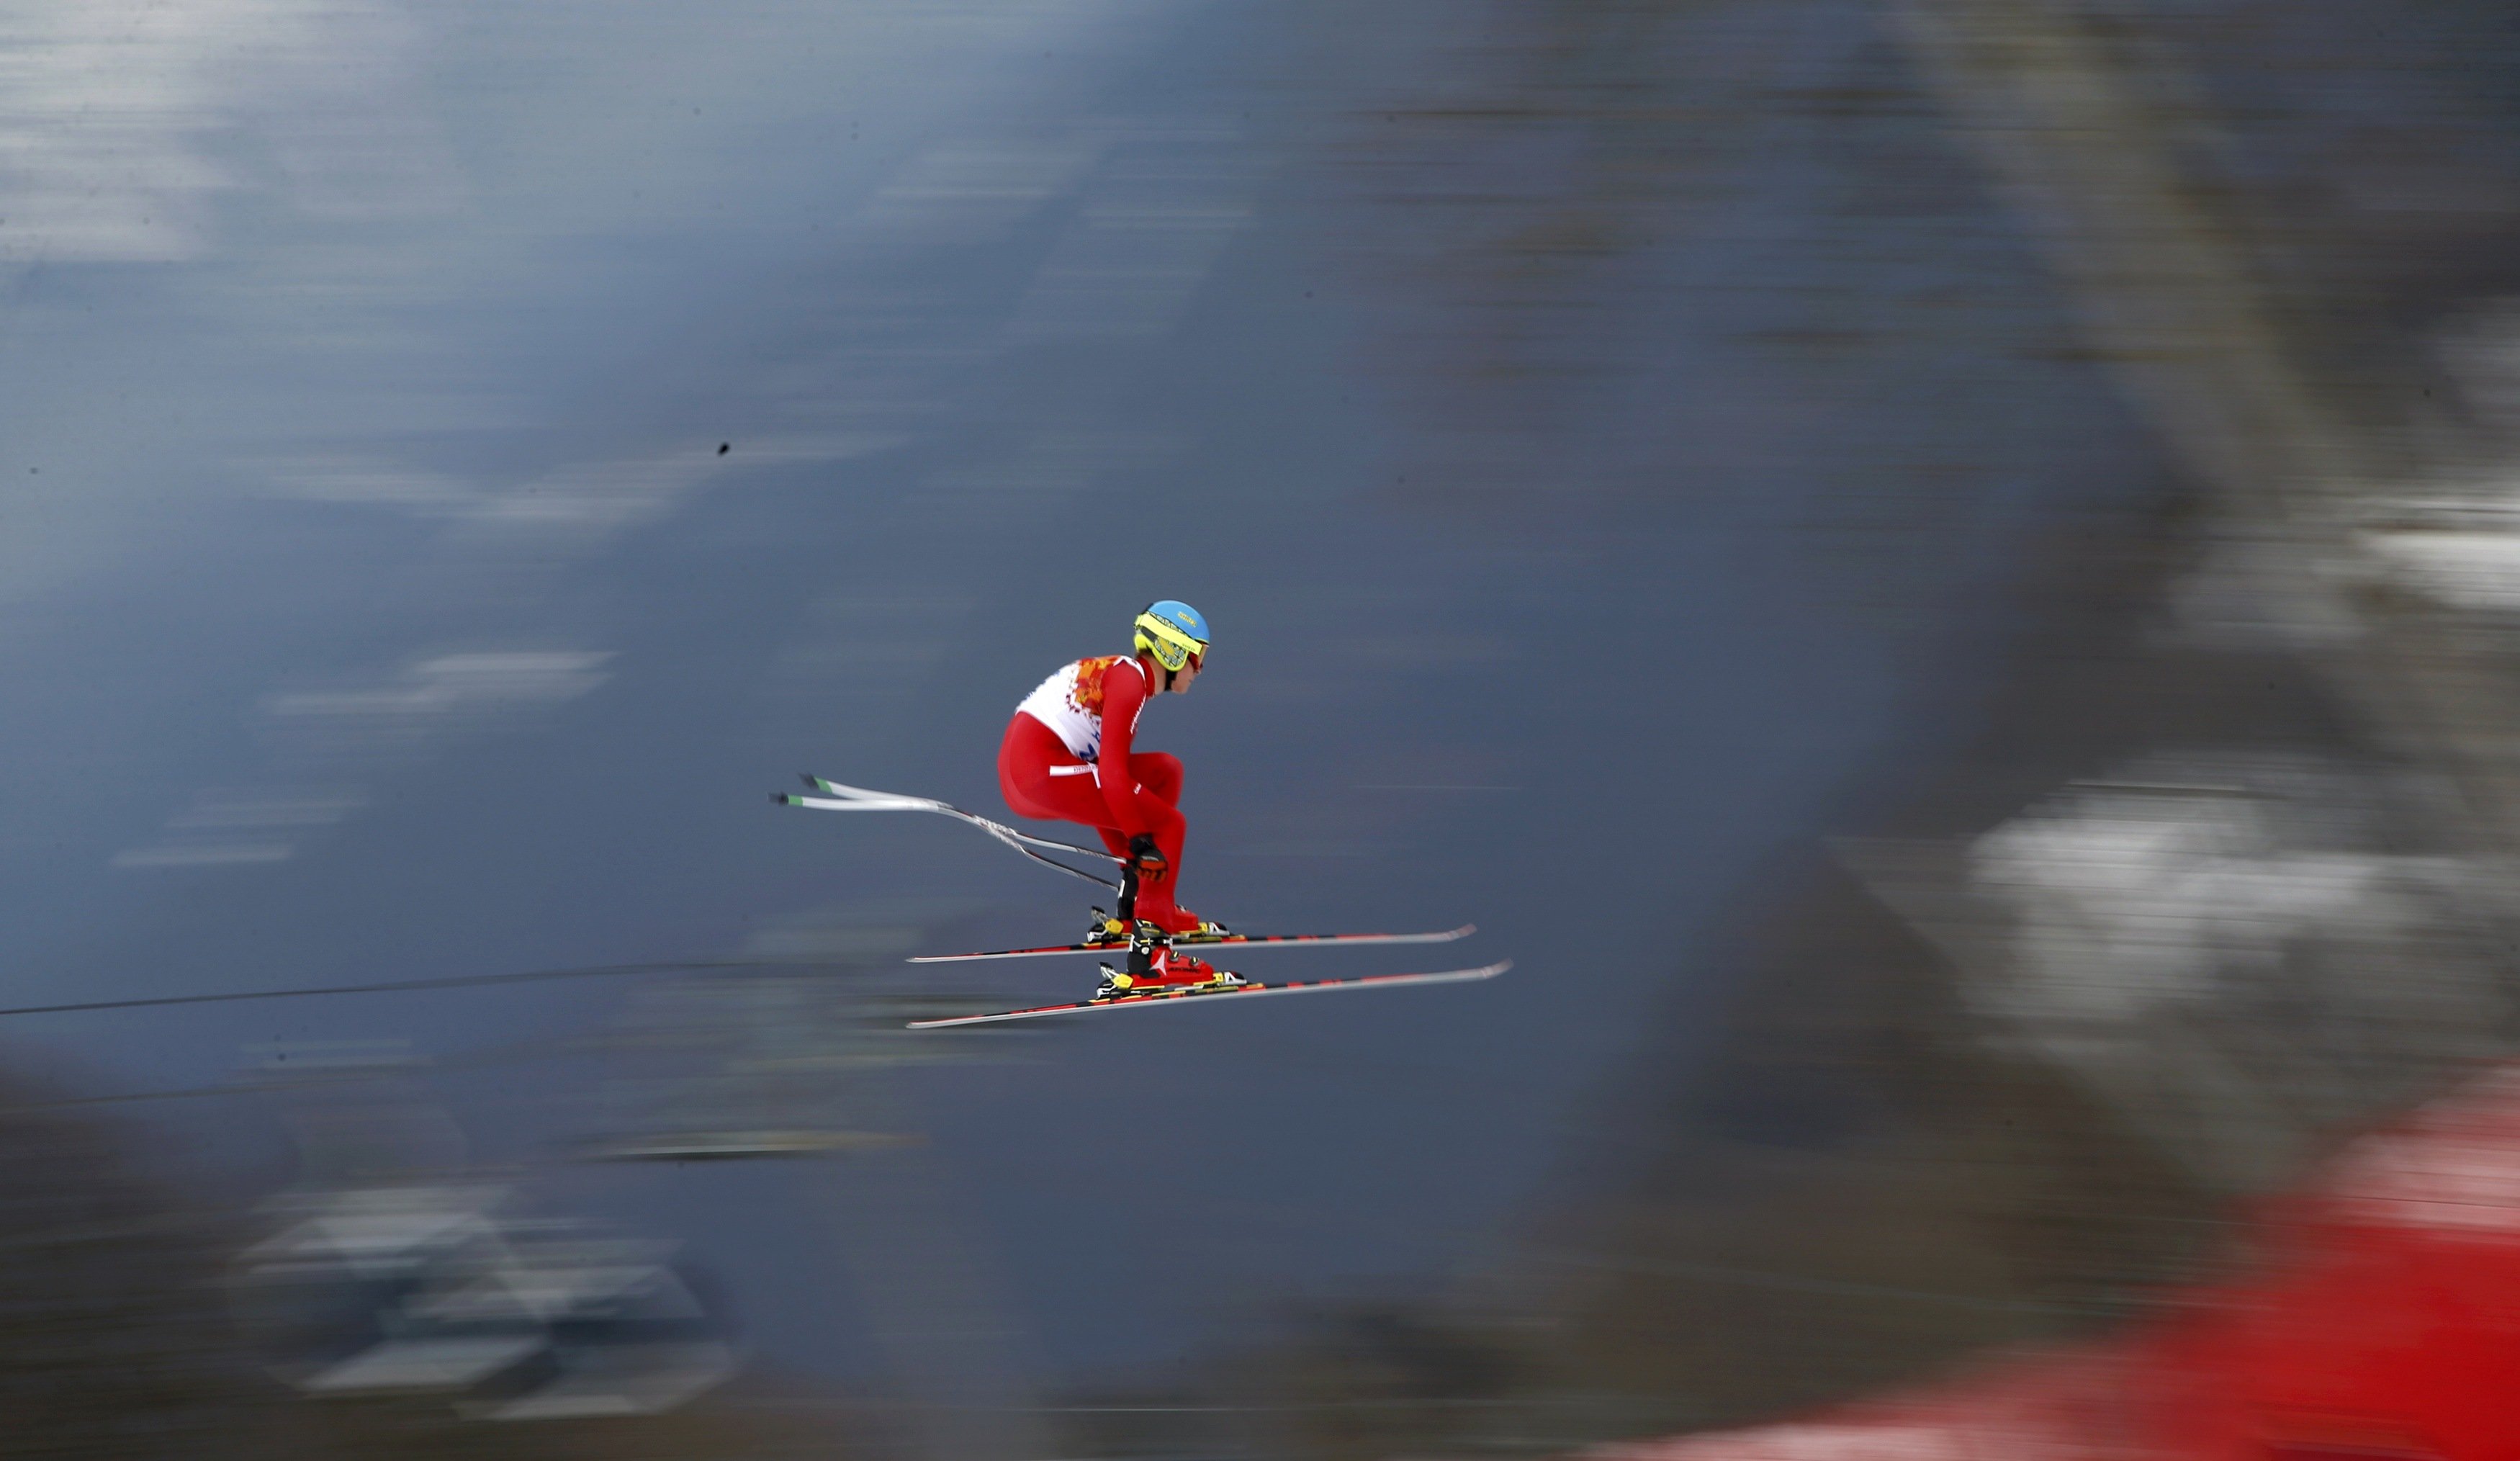 Denmark's Christoffer Faarup goes airborne during the downhill run of the men's alpine skiing super combined training session. (Mike Segar—Reuters)